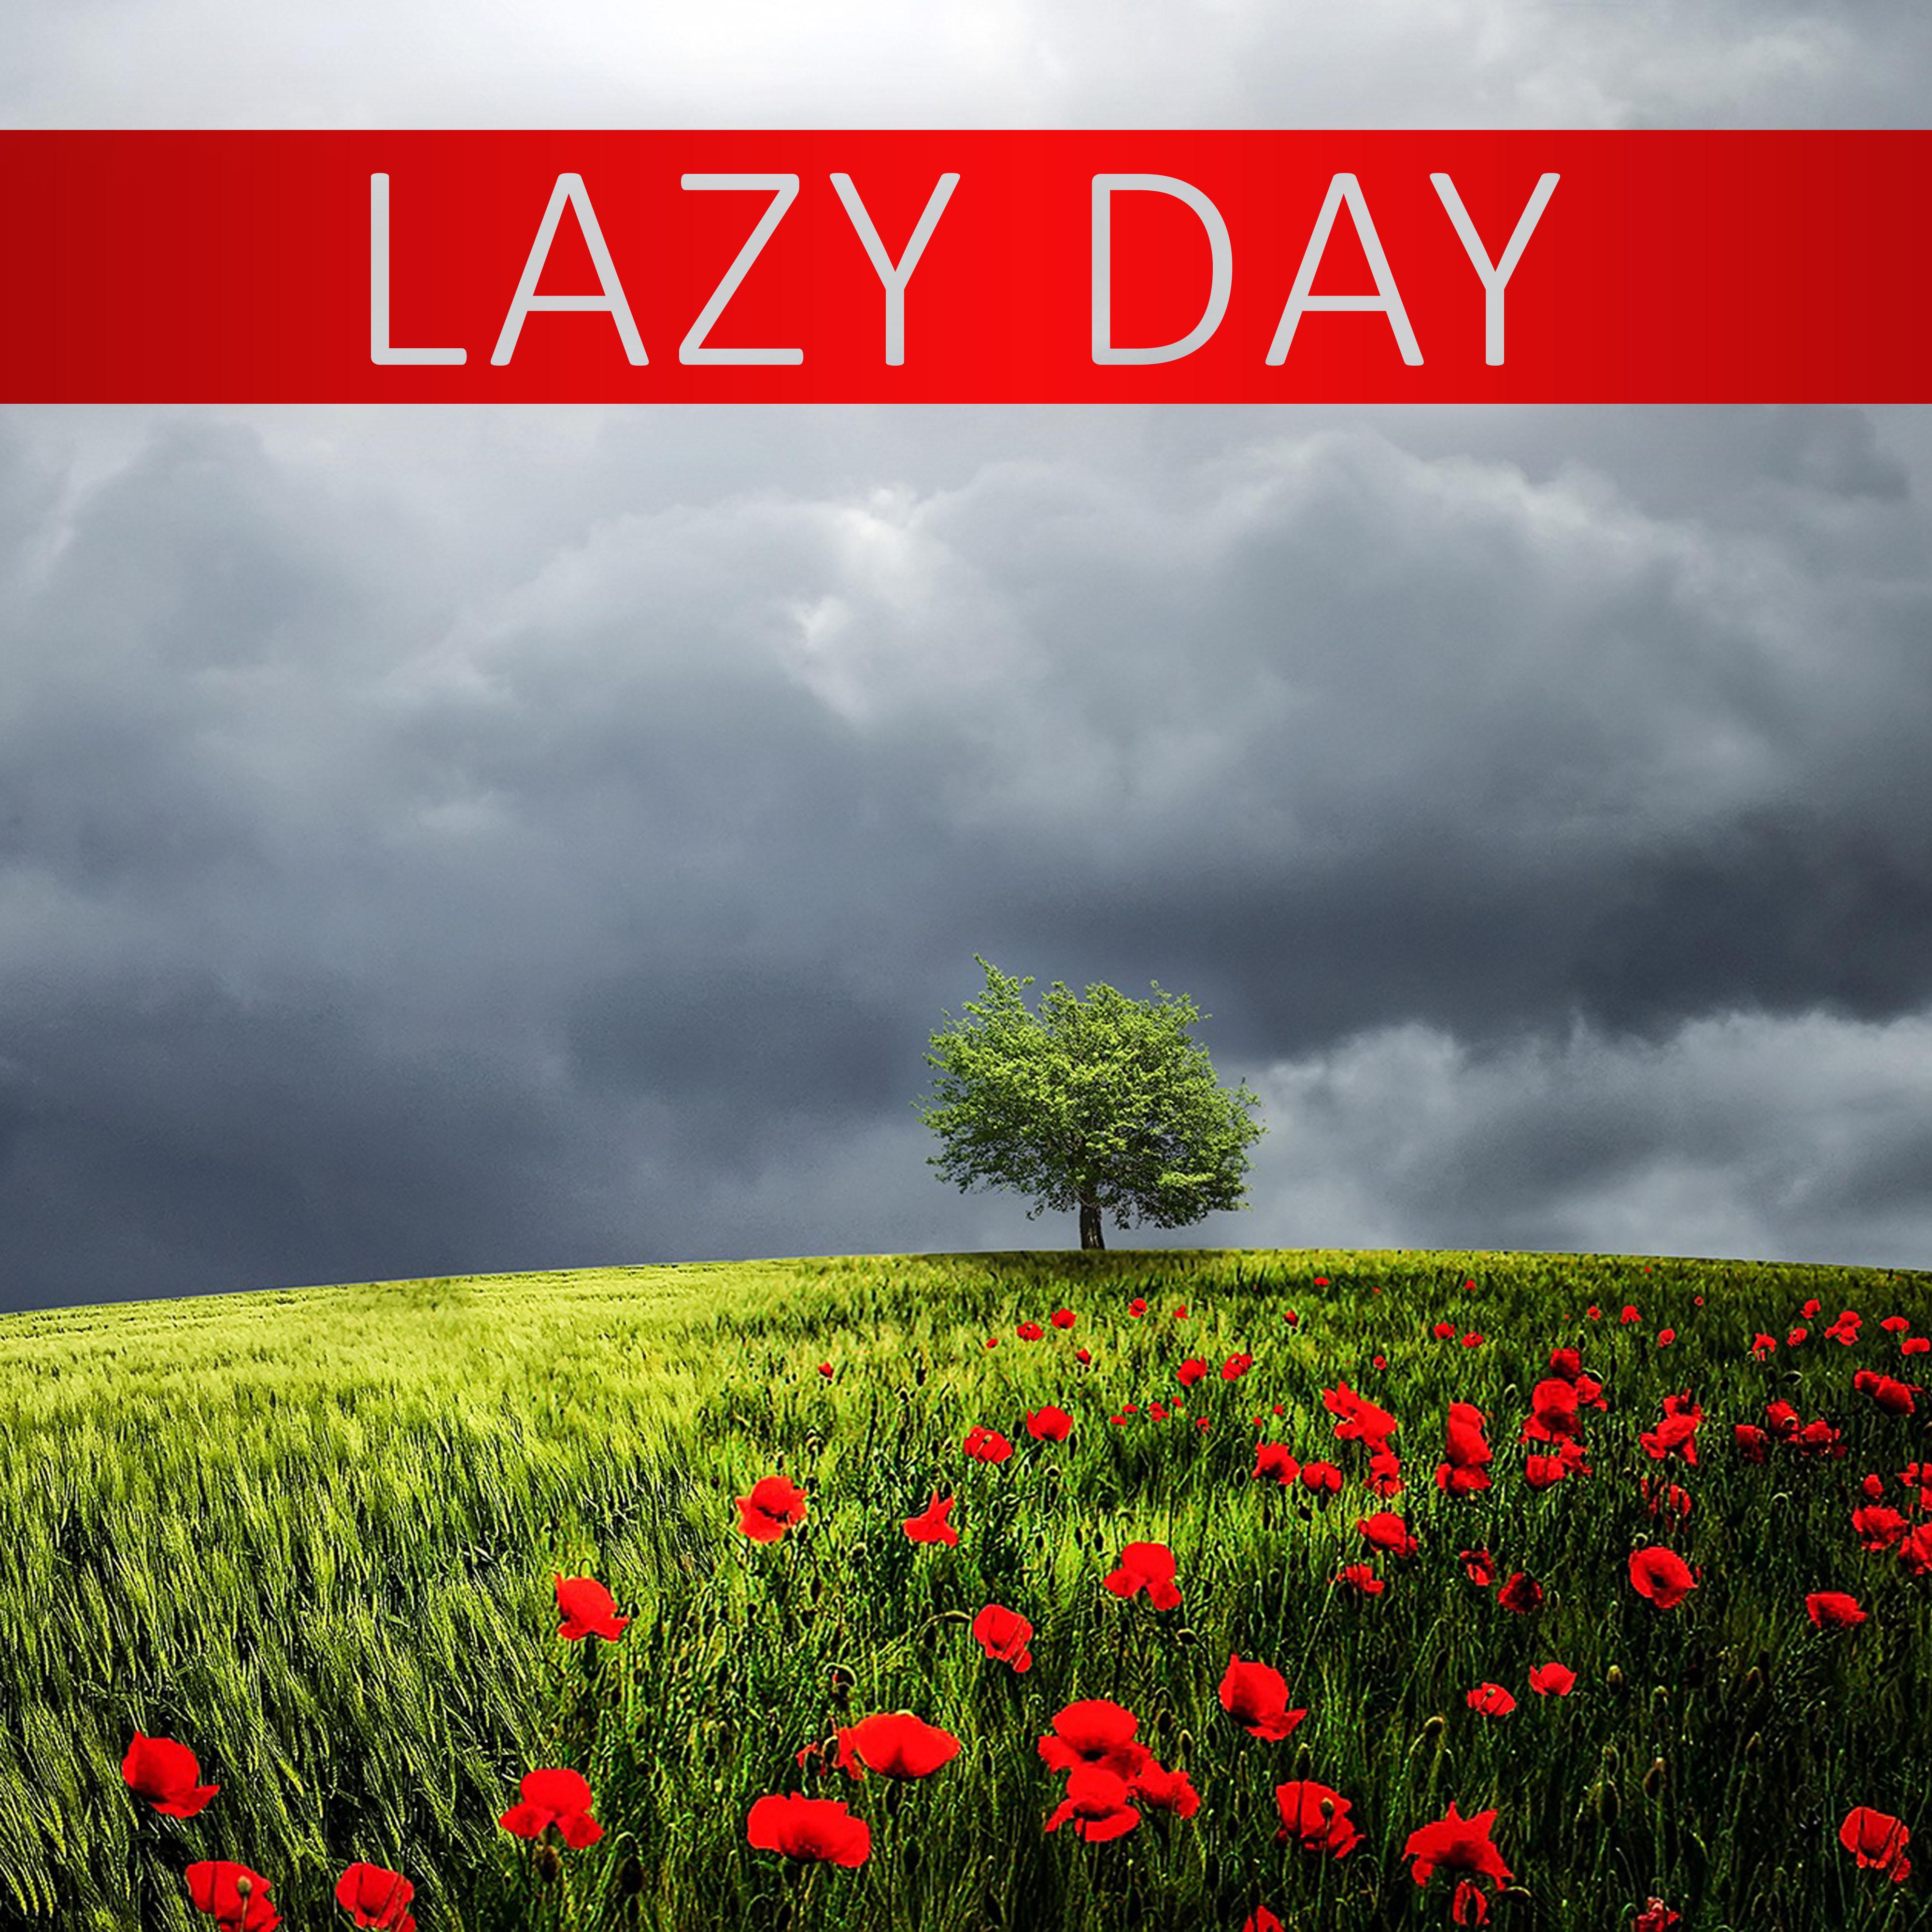 Lazy Day – New Age Music for Total Relaxation, Calmness Day at Home, Sounds of Nature to Reduce Stress and Relax